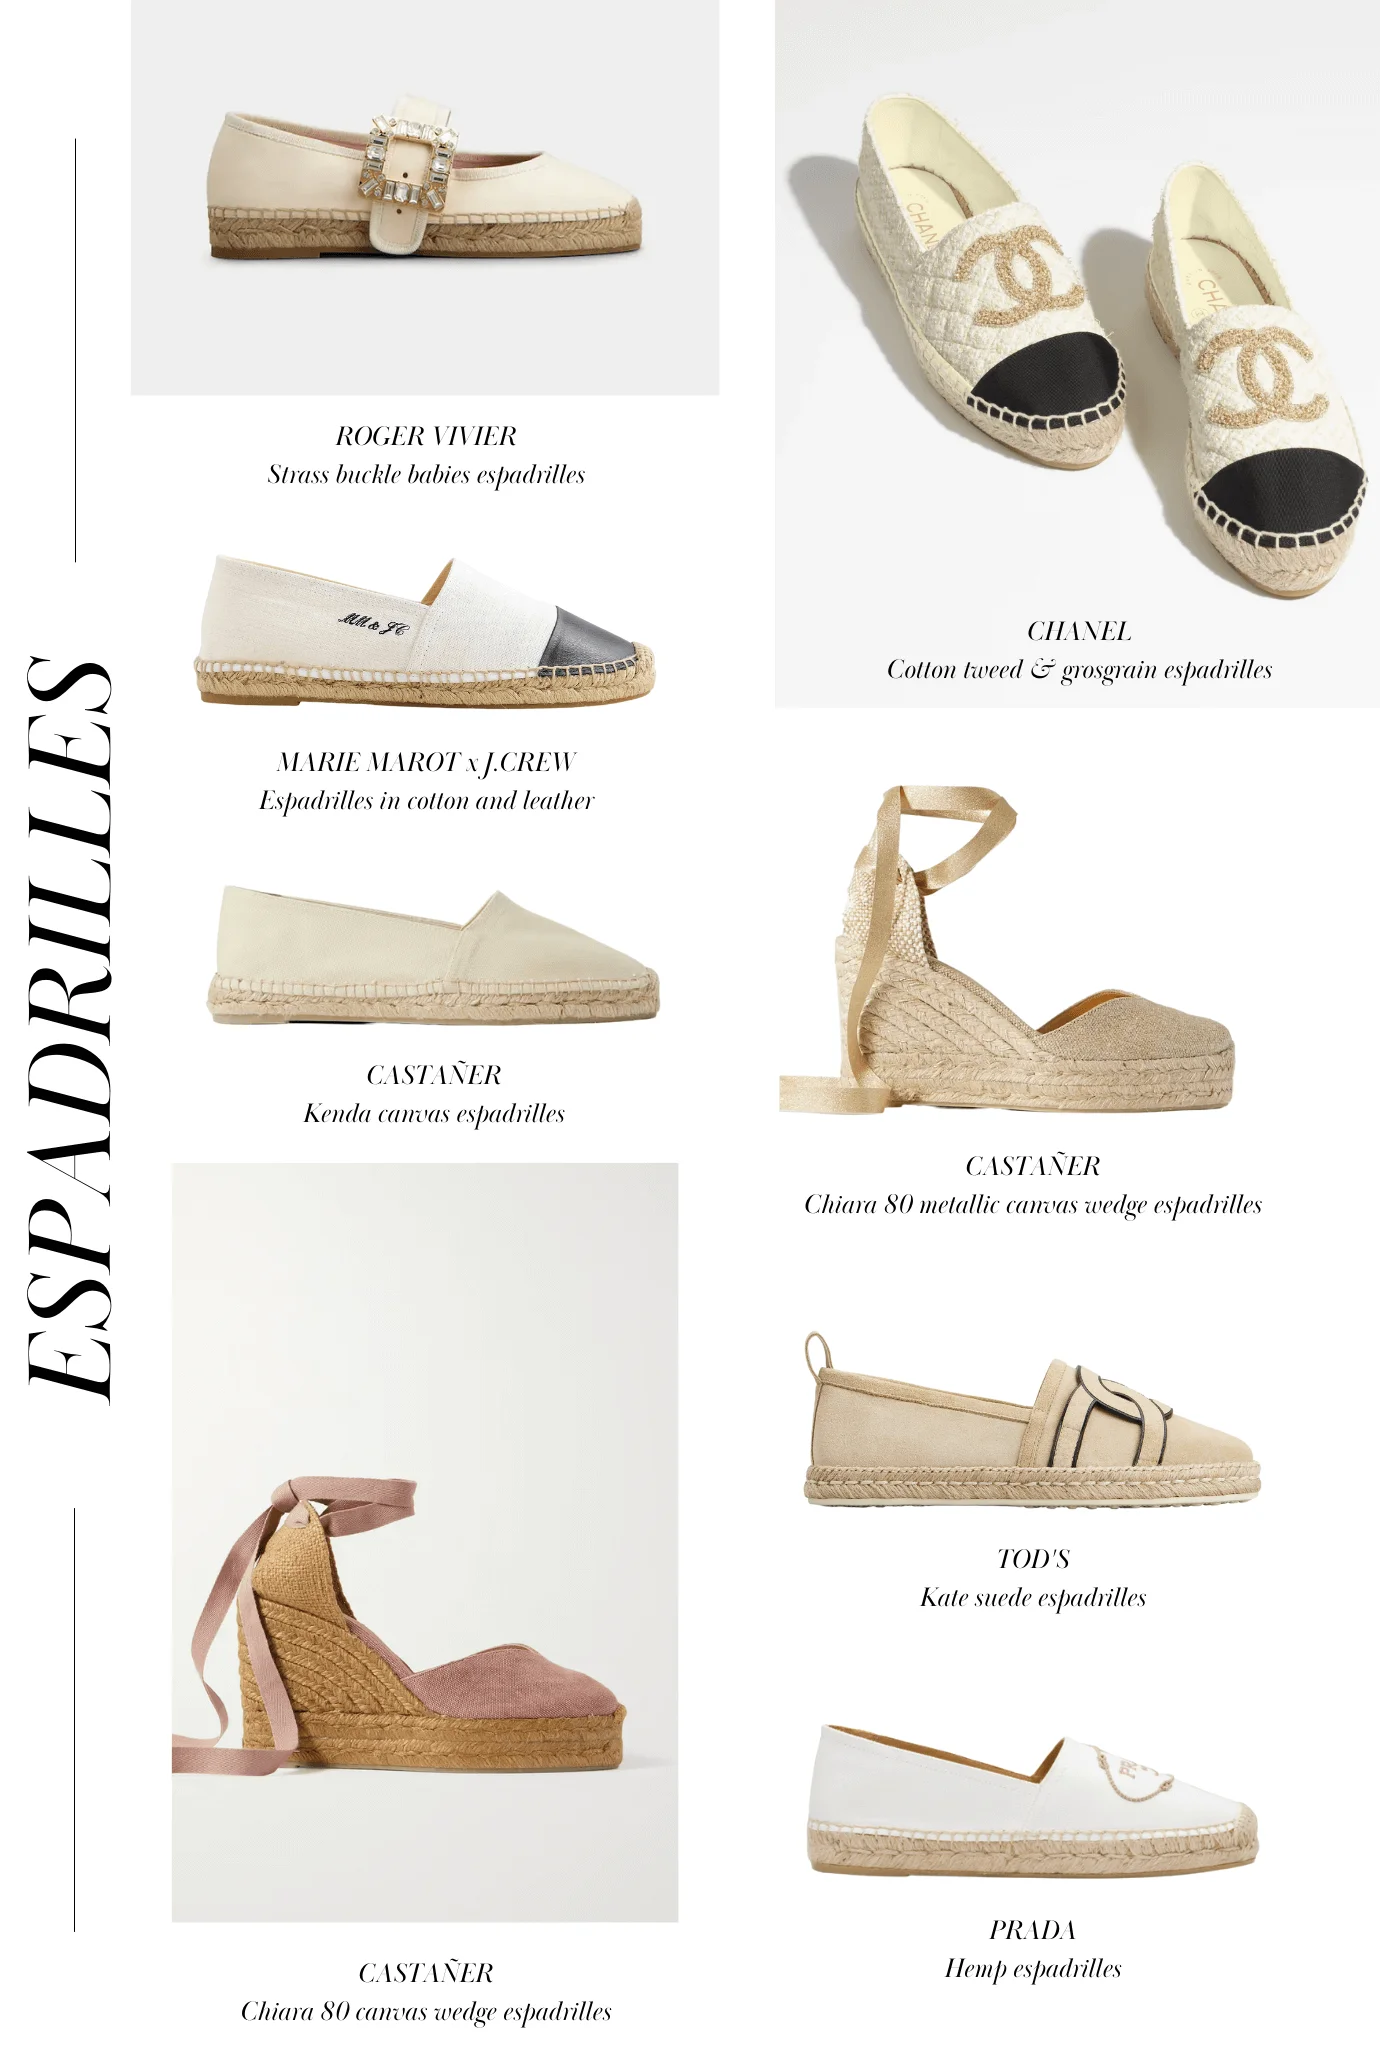 The evolution of espadrilles to become summer staples